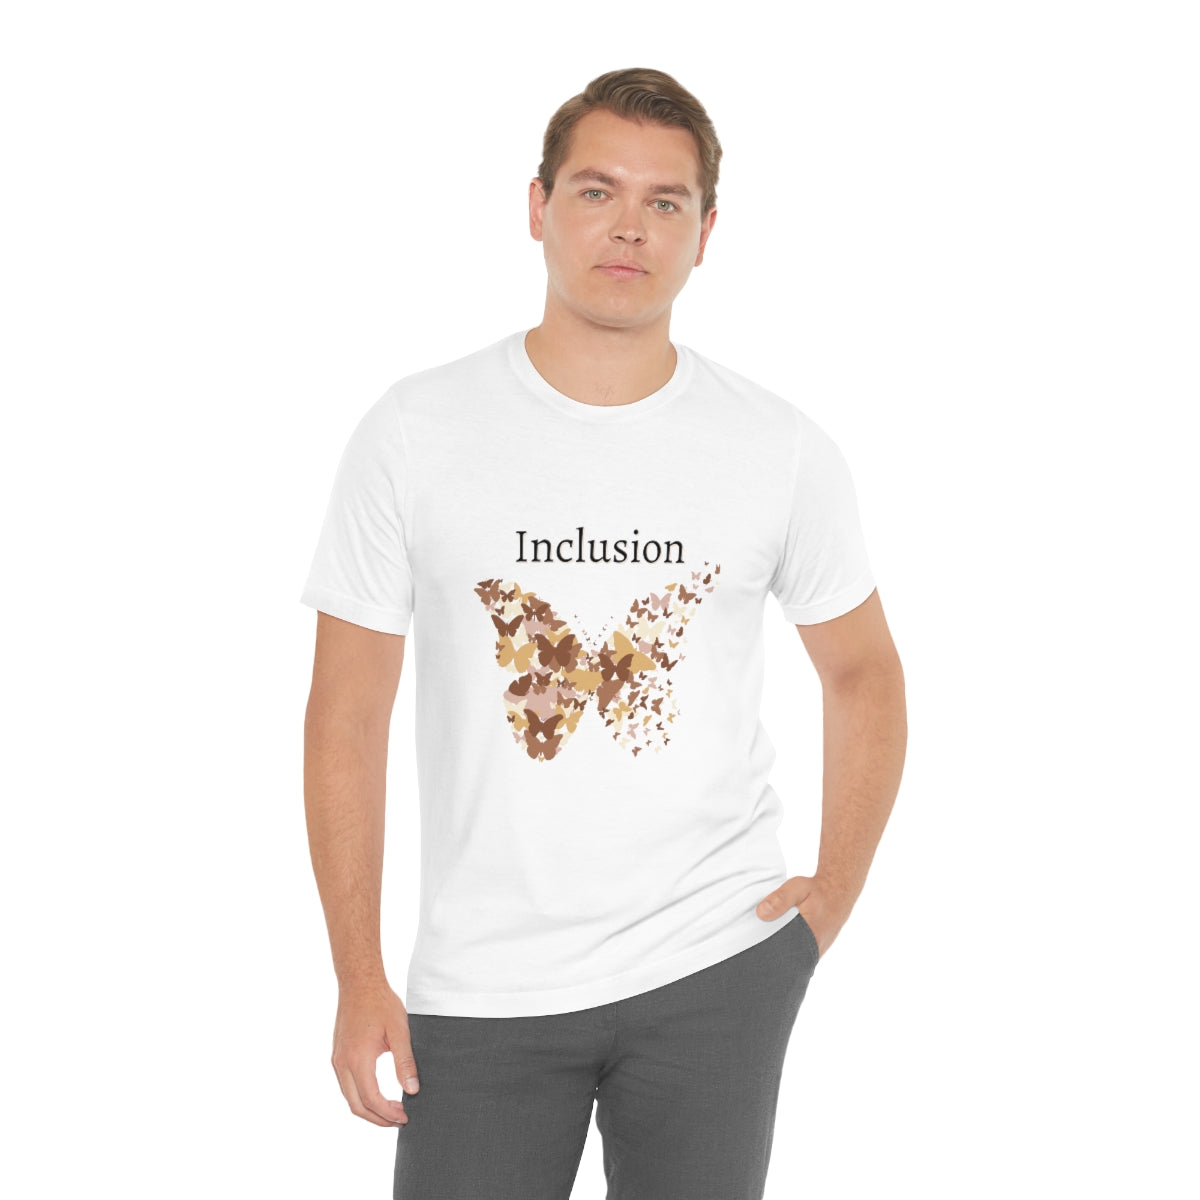 Inclusion Shirt Shades Butterflies, Diversity Inclusion Tshirts, DEIB Statement Tees, Inclusion is an Act Tees